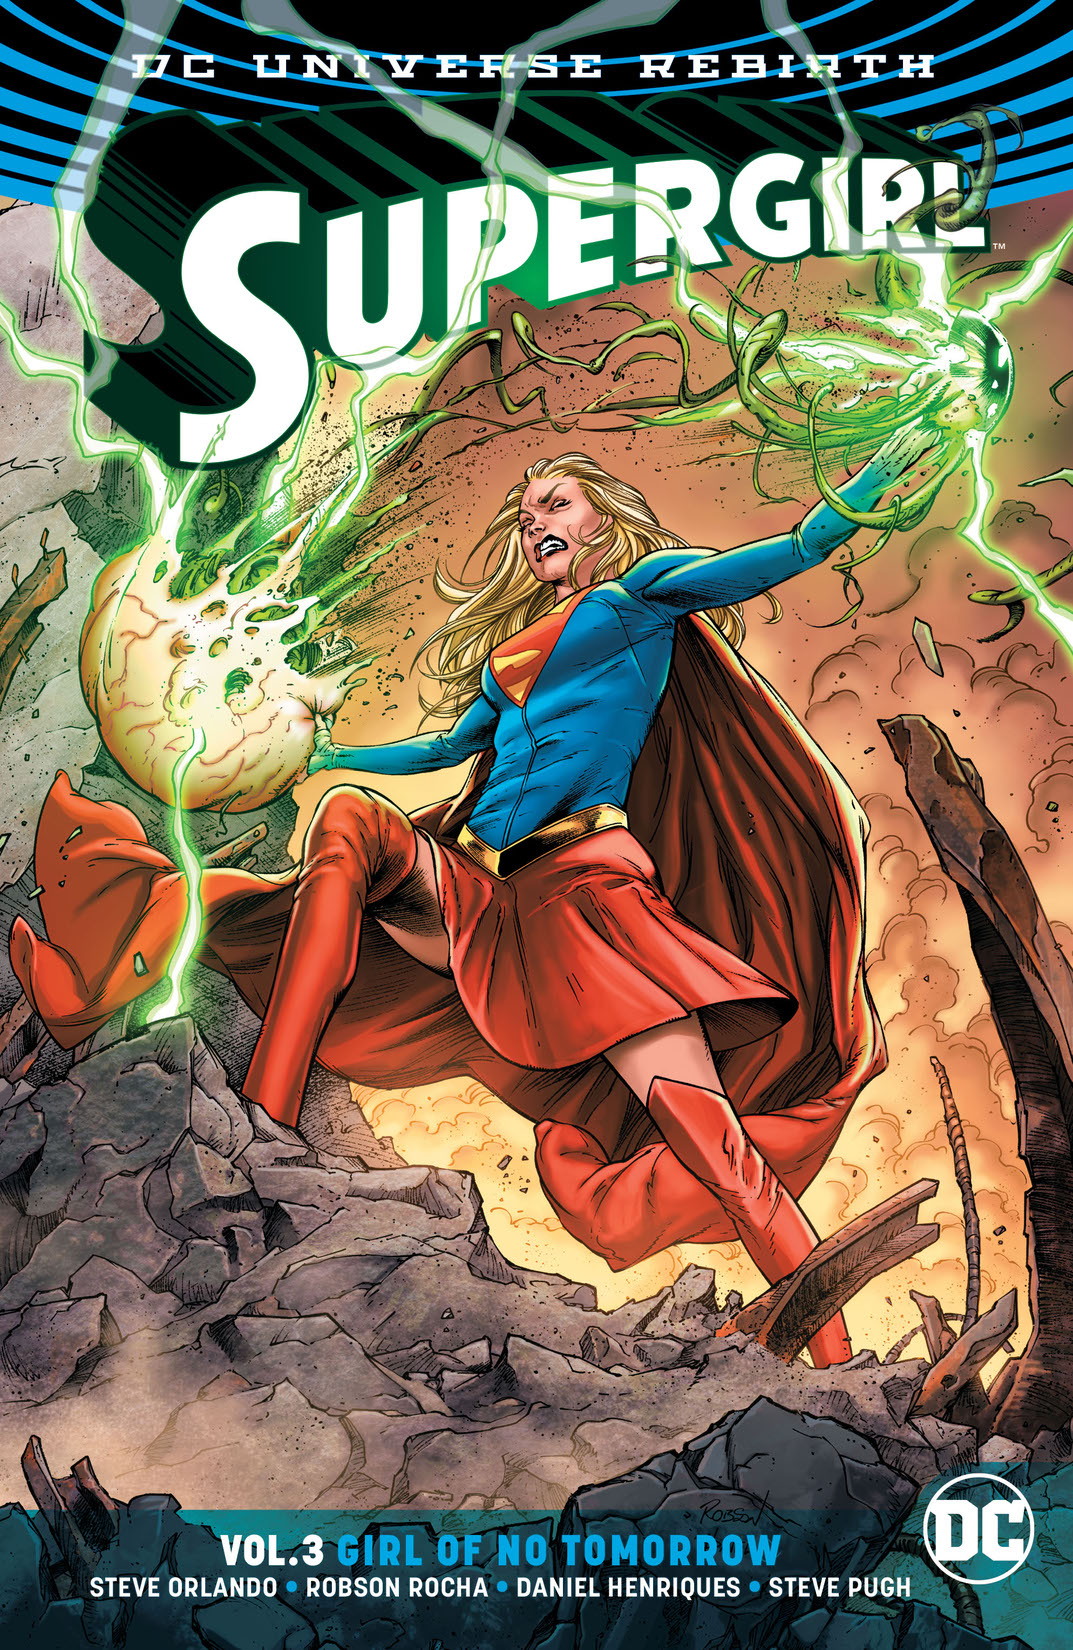 Supergirl Vol. 3: Girl of No Tomorrow (Rebirth) preview images